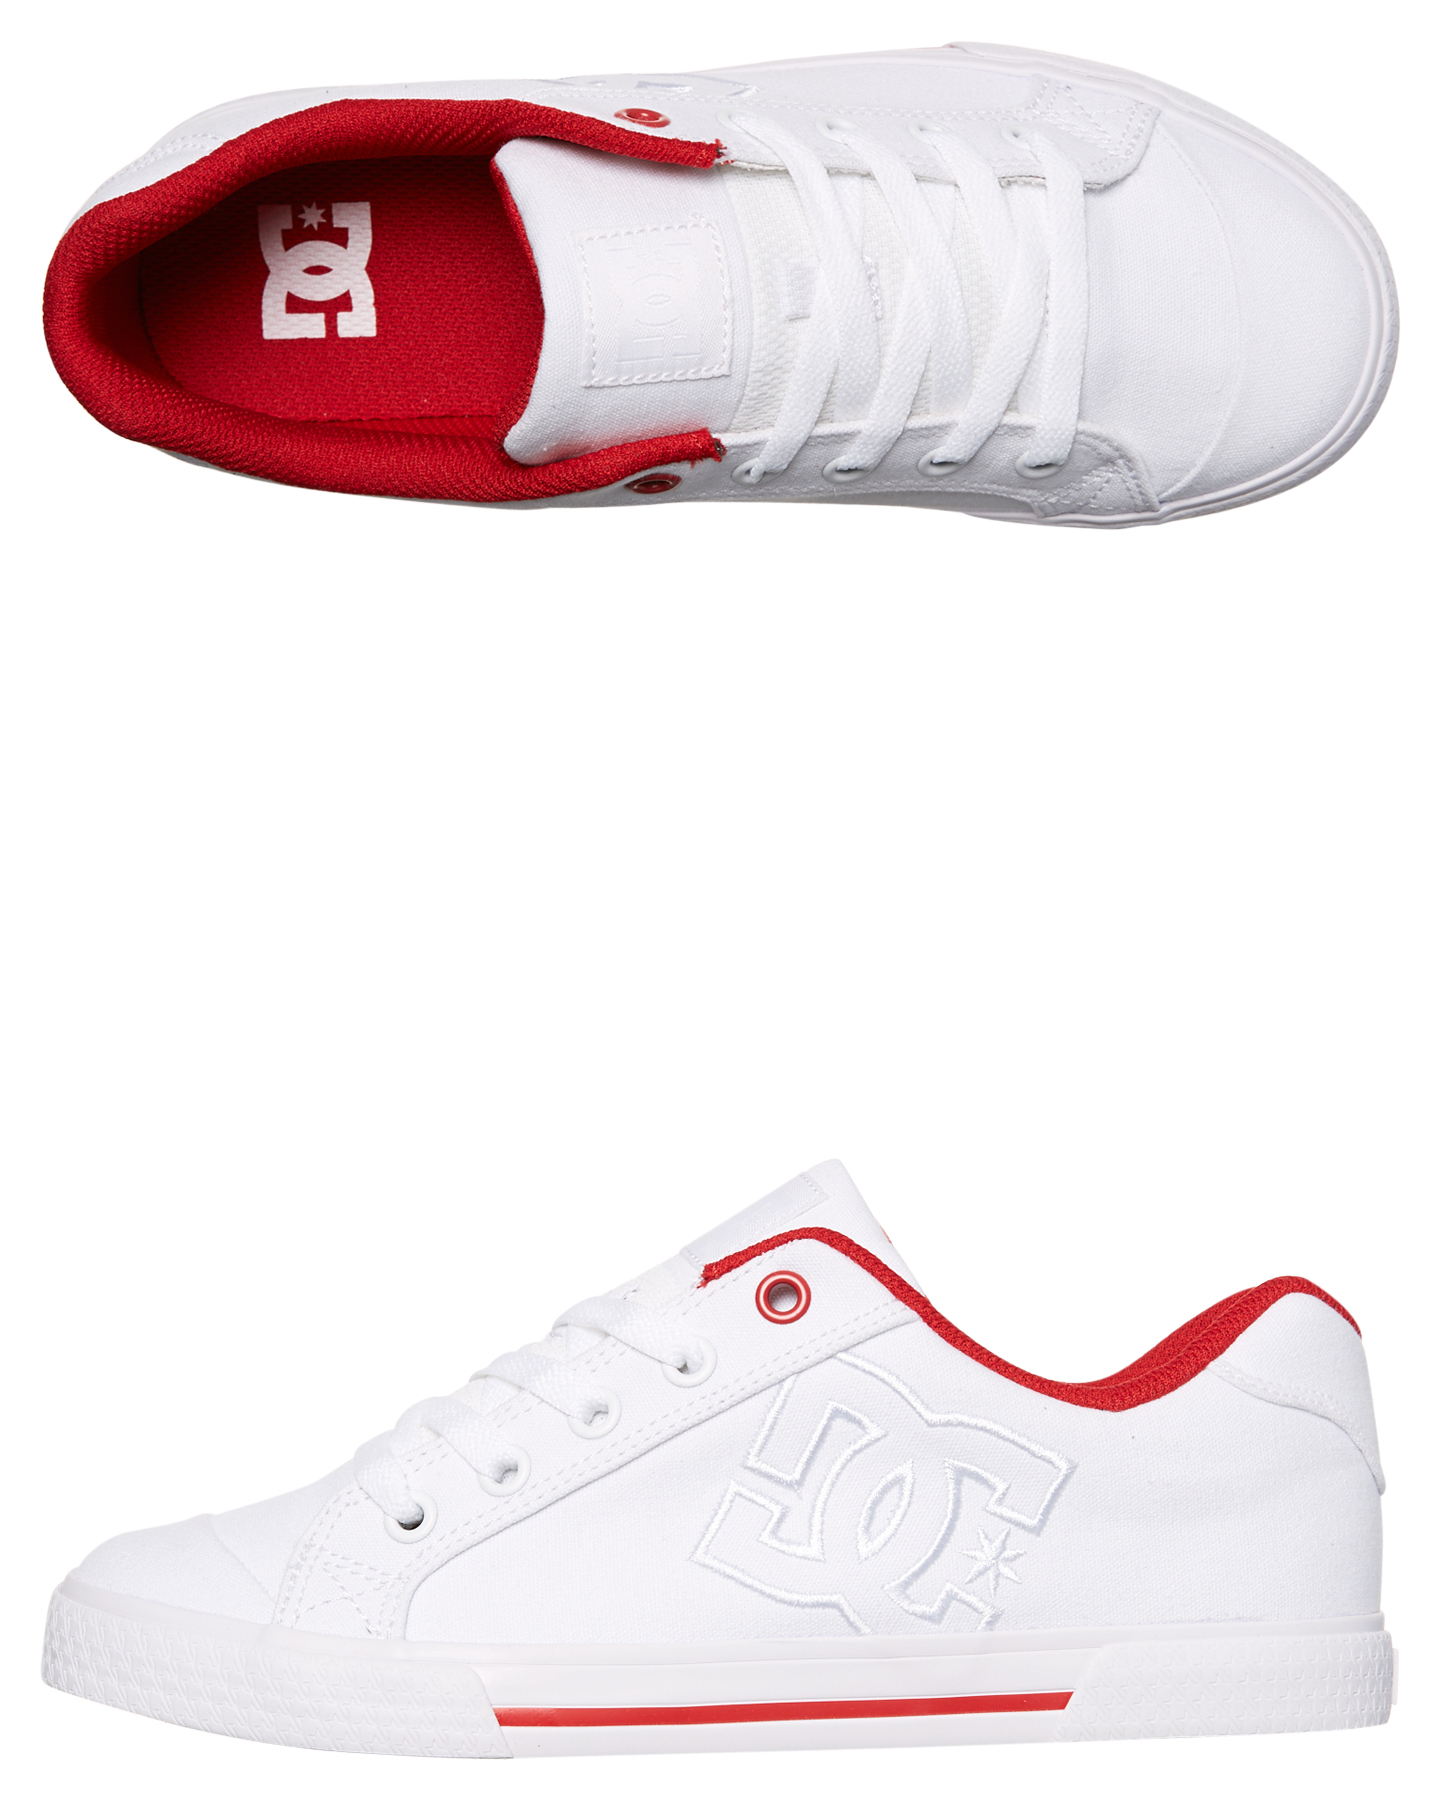 red and white dc shoes